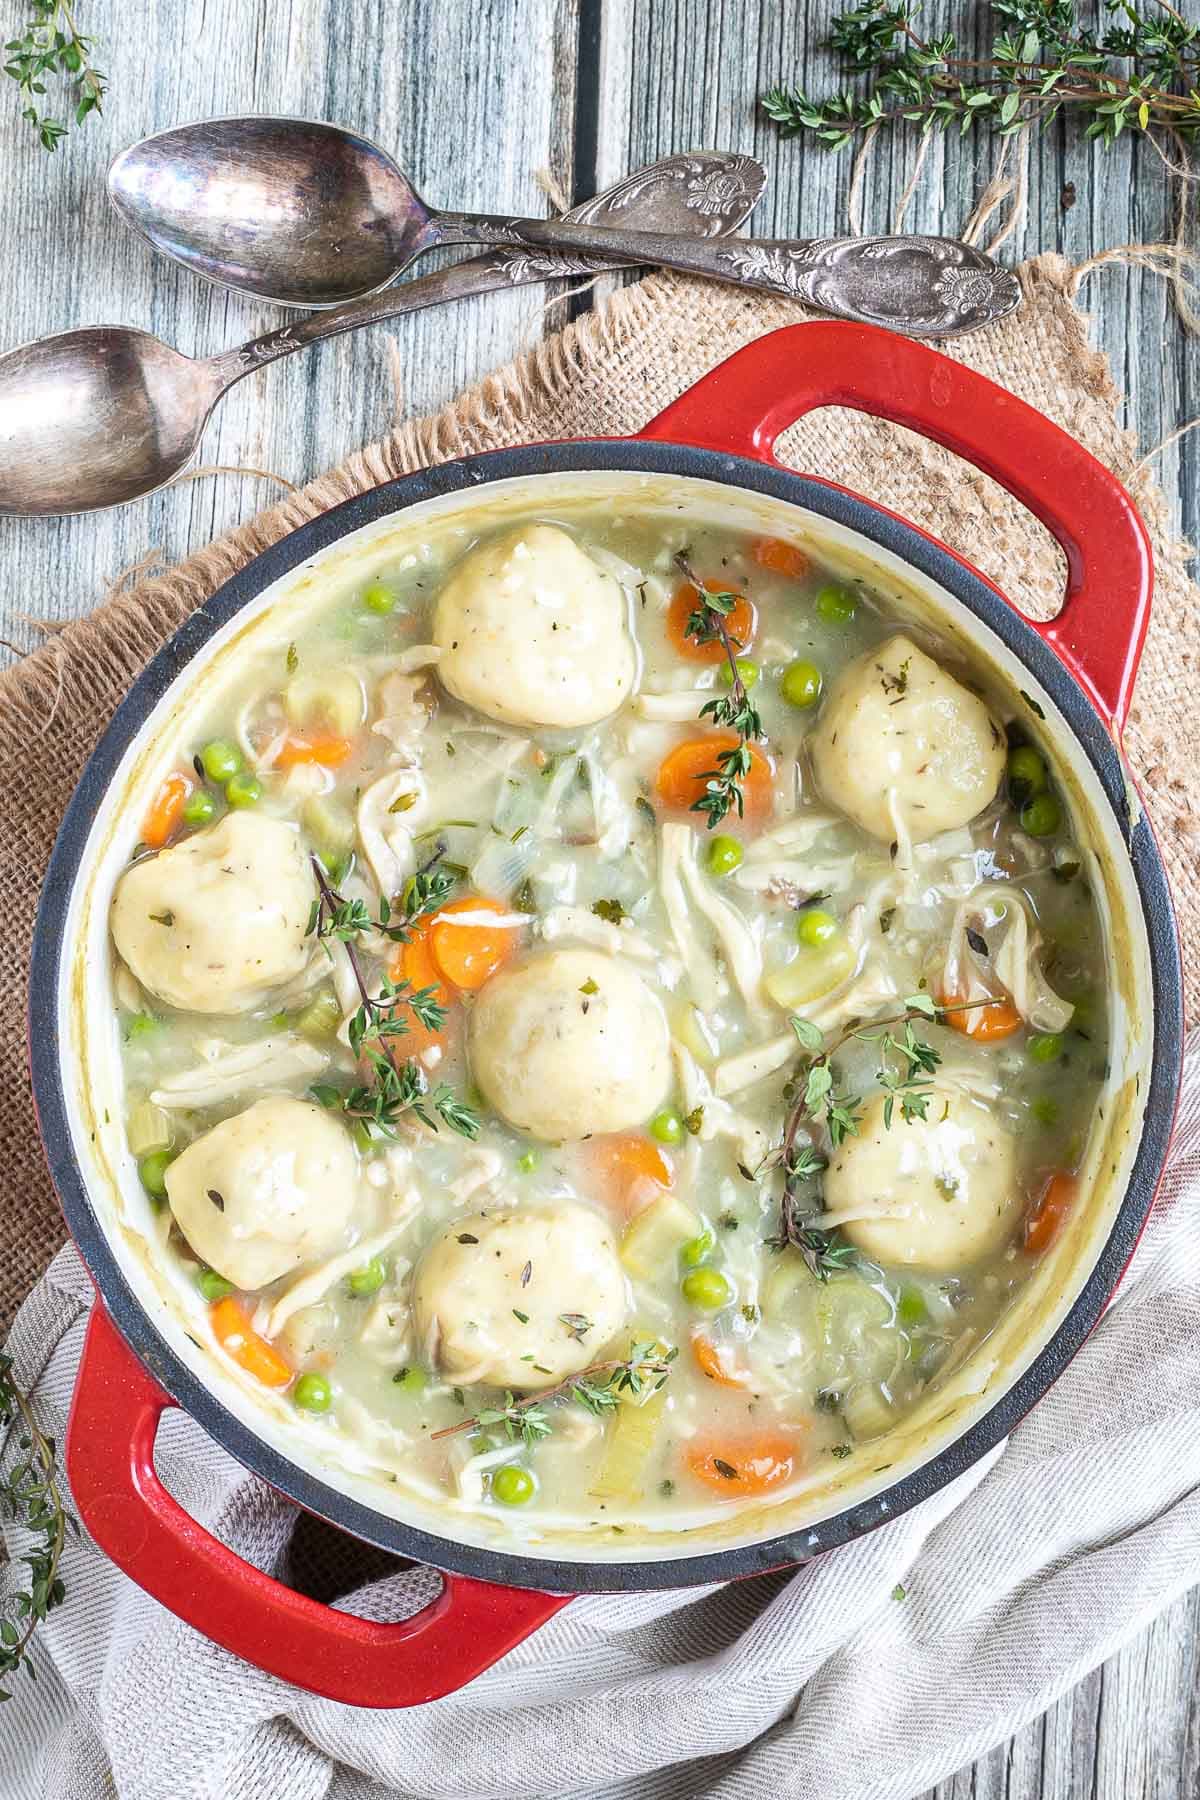 A red-white enameled Dutch oven with dumplings, chopped veggies, shredded mushroom pieces in place of chicken, green herbs in a thick, white stew.